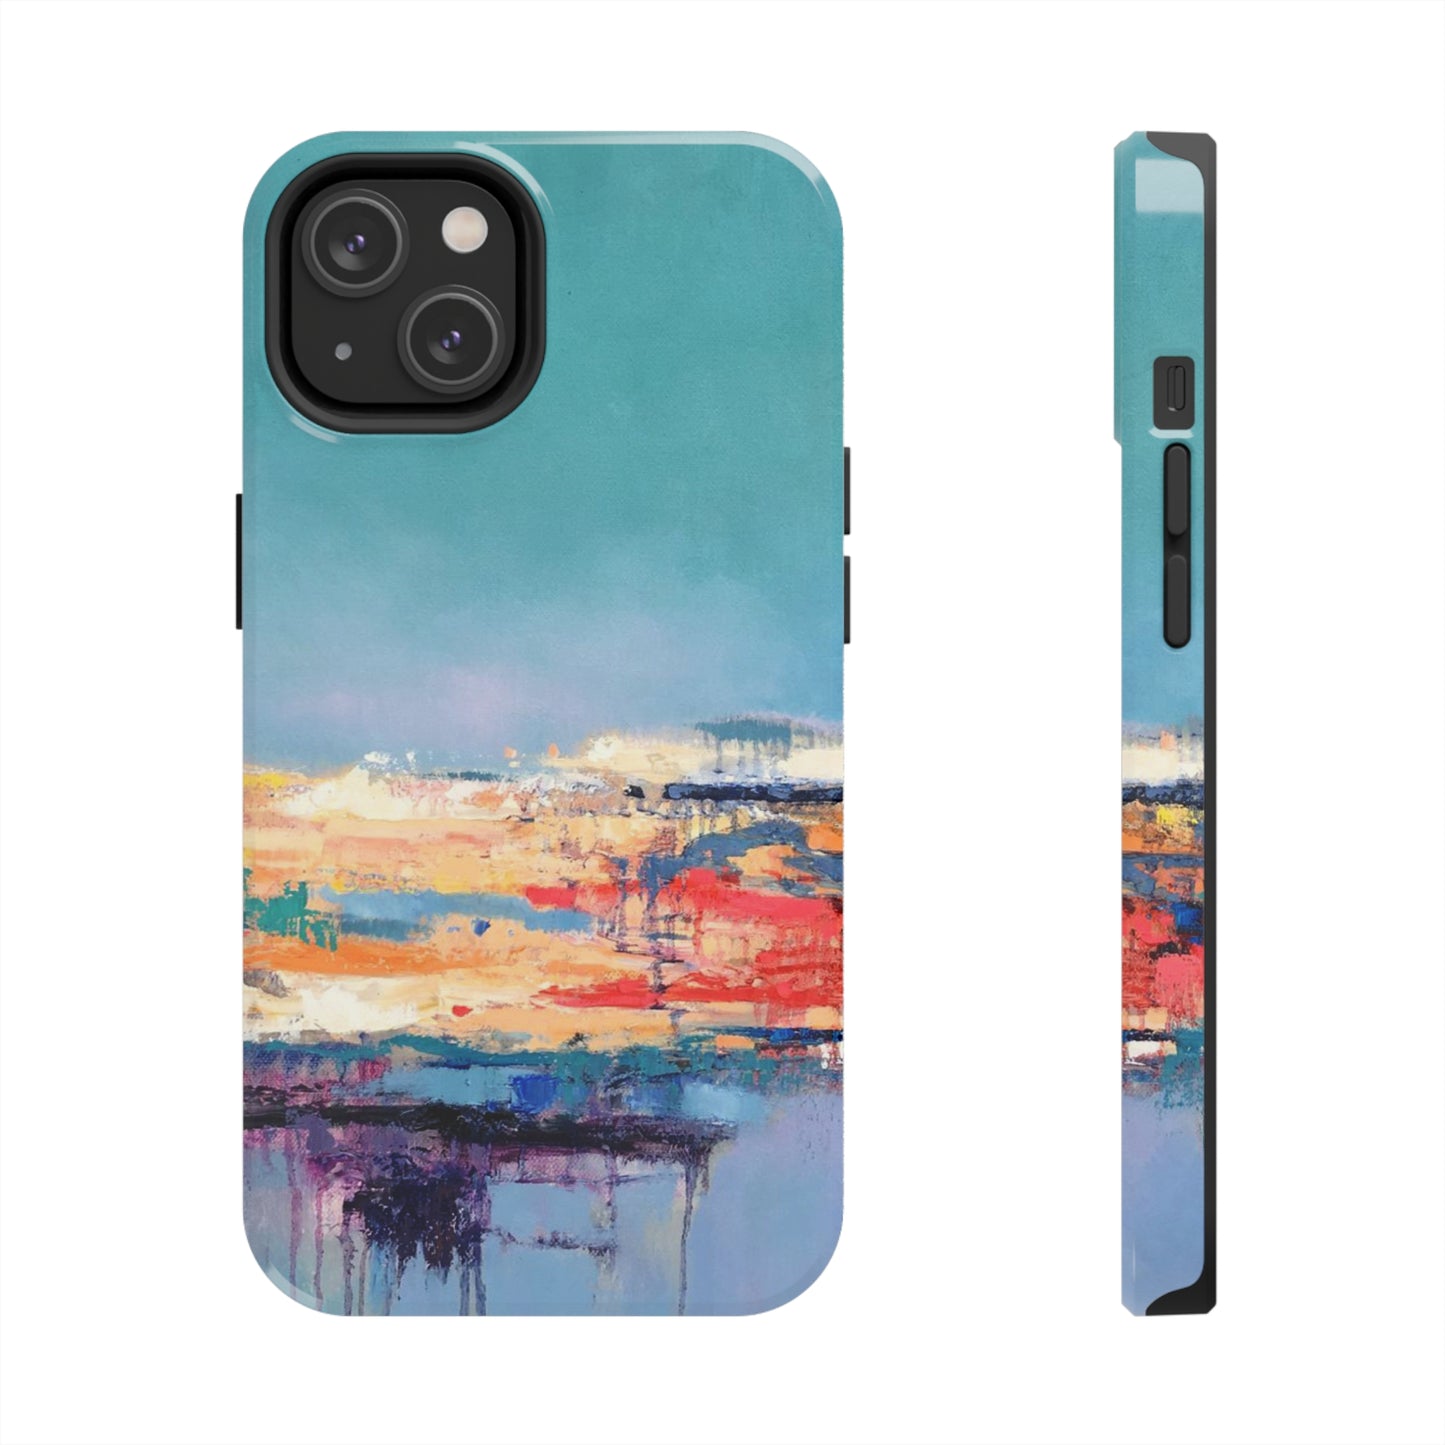 phone case featuring a beautiful colorful abstract painting